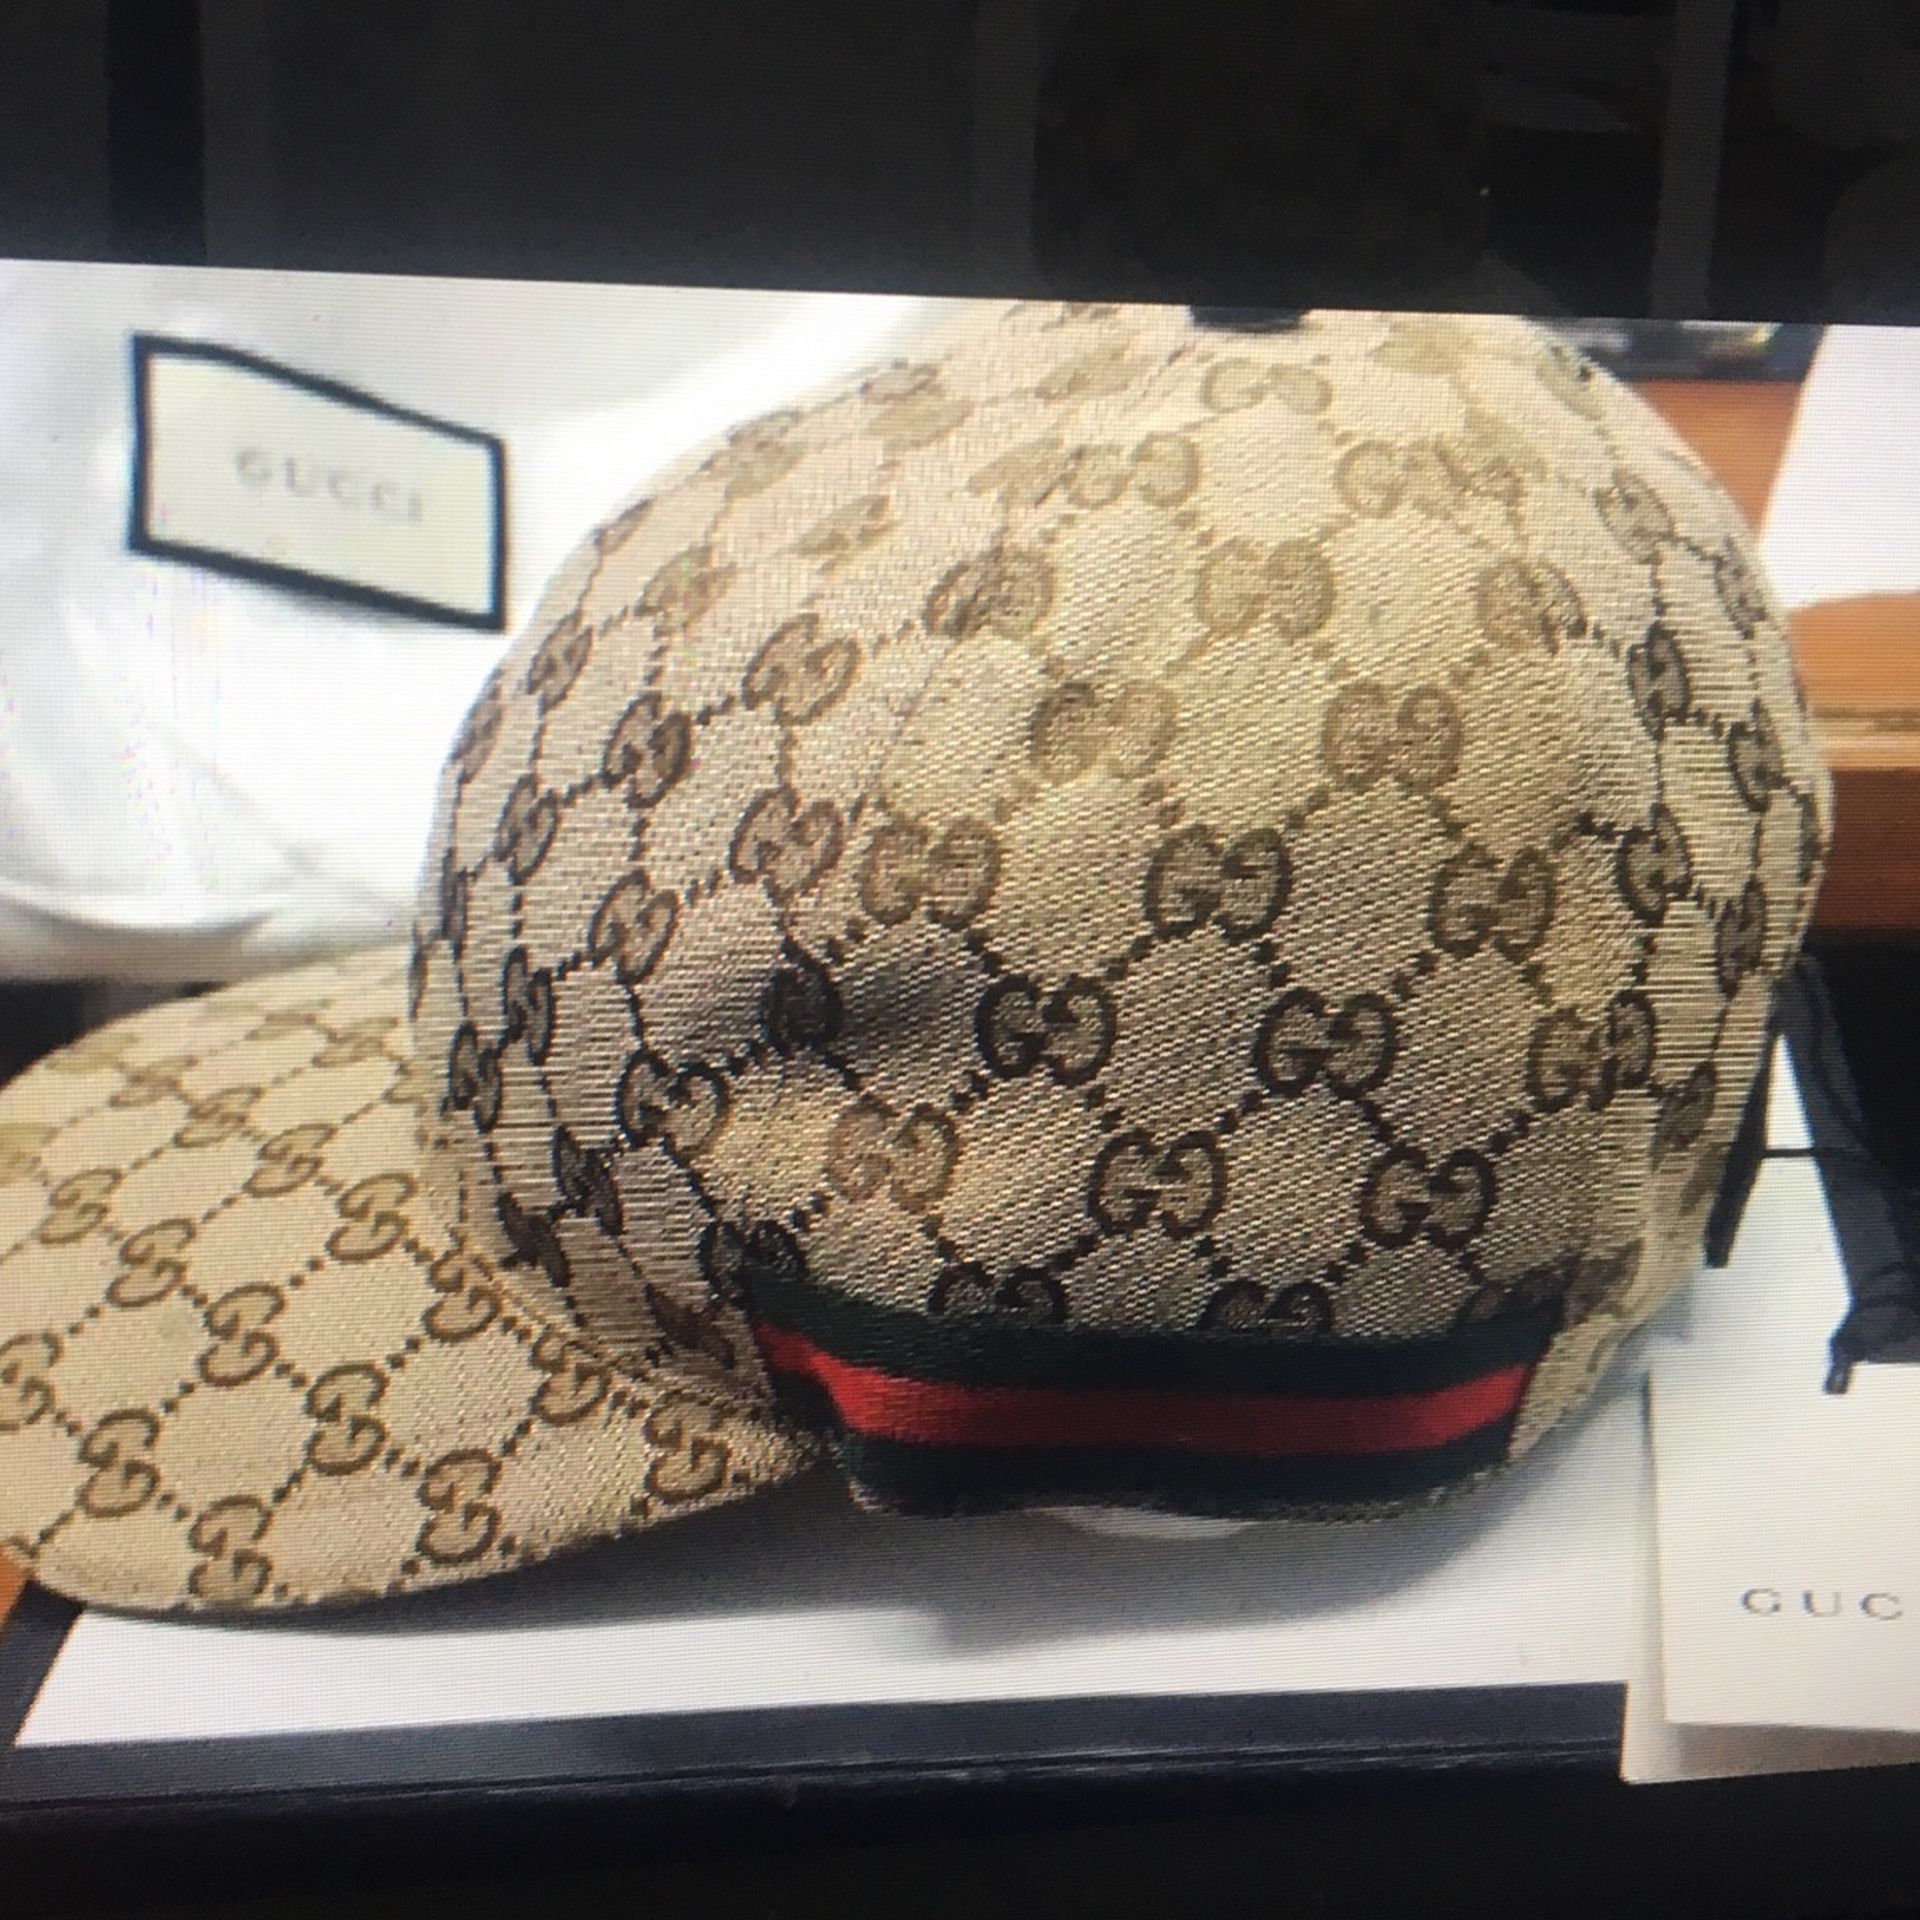 Gucci Original OG Canvas Baseball Hat with Web Size Large Perfect Condition With Tag, Bag, And Box - Like New